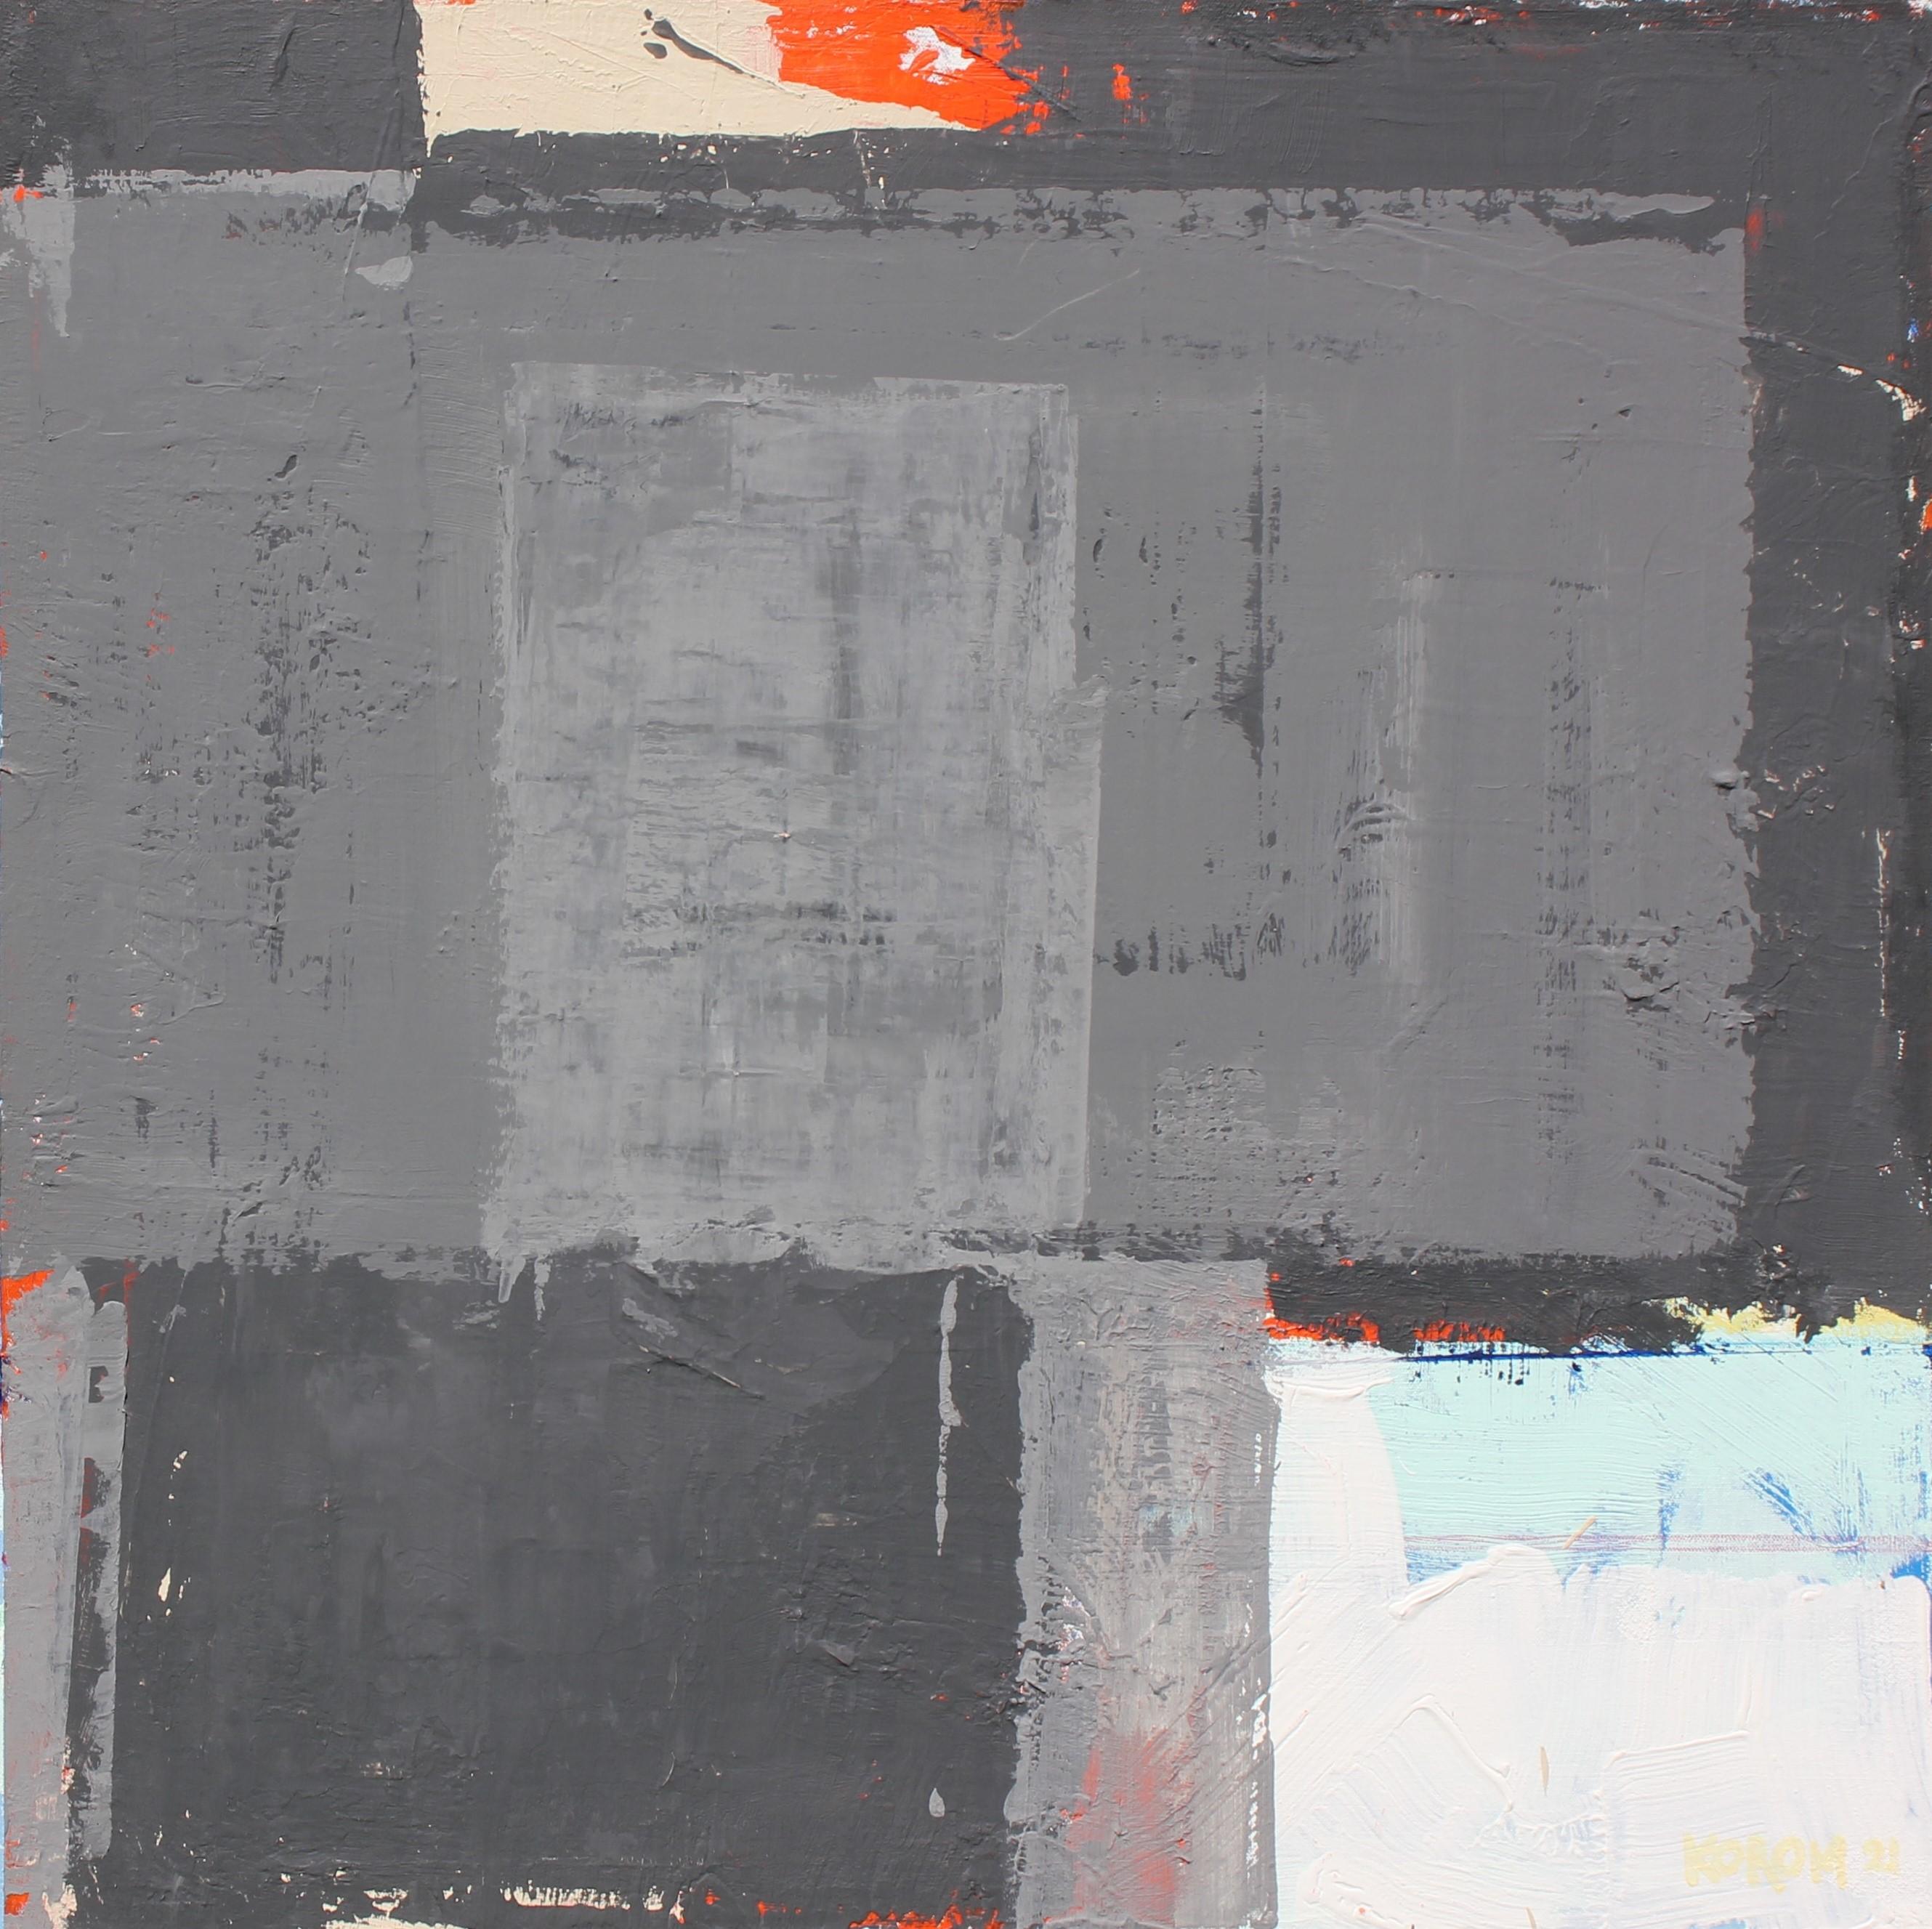 <p>Artist Comments<br />Artist Joey Korom demonstrates a bold abstract in gradating shades of gray. "With this piece, there is no reference to the New York Times, no parallels were intended, and none were included," says Joey. He presents a